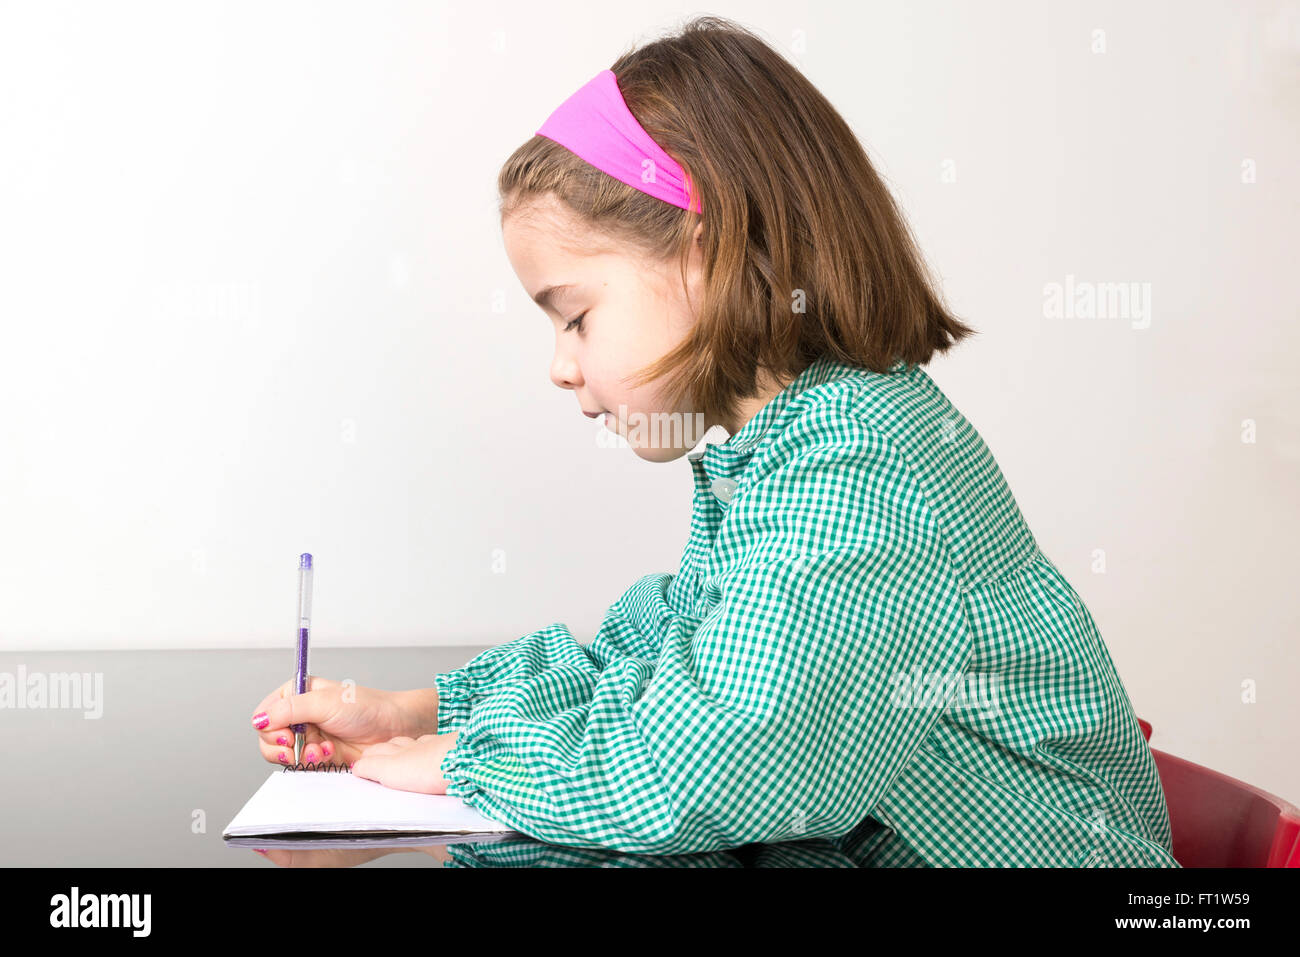 Little girl with a green plaid smock writing in a notebook at home Stock Photo